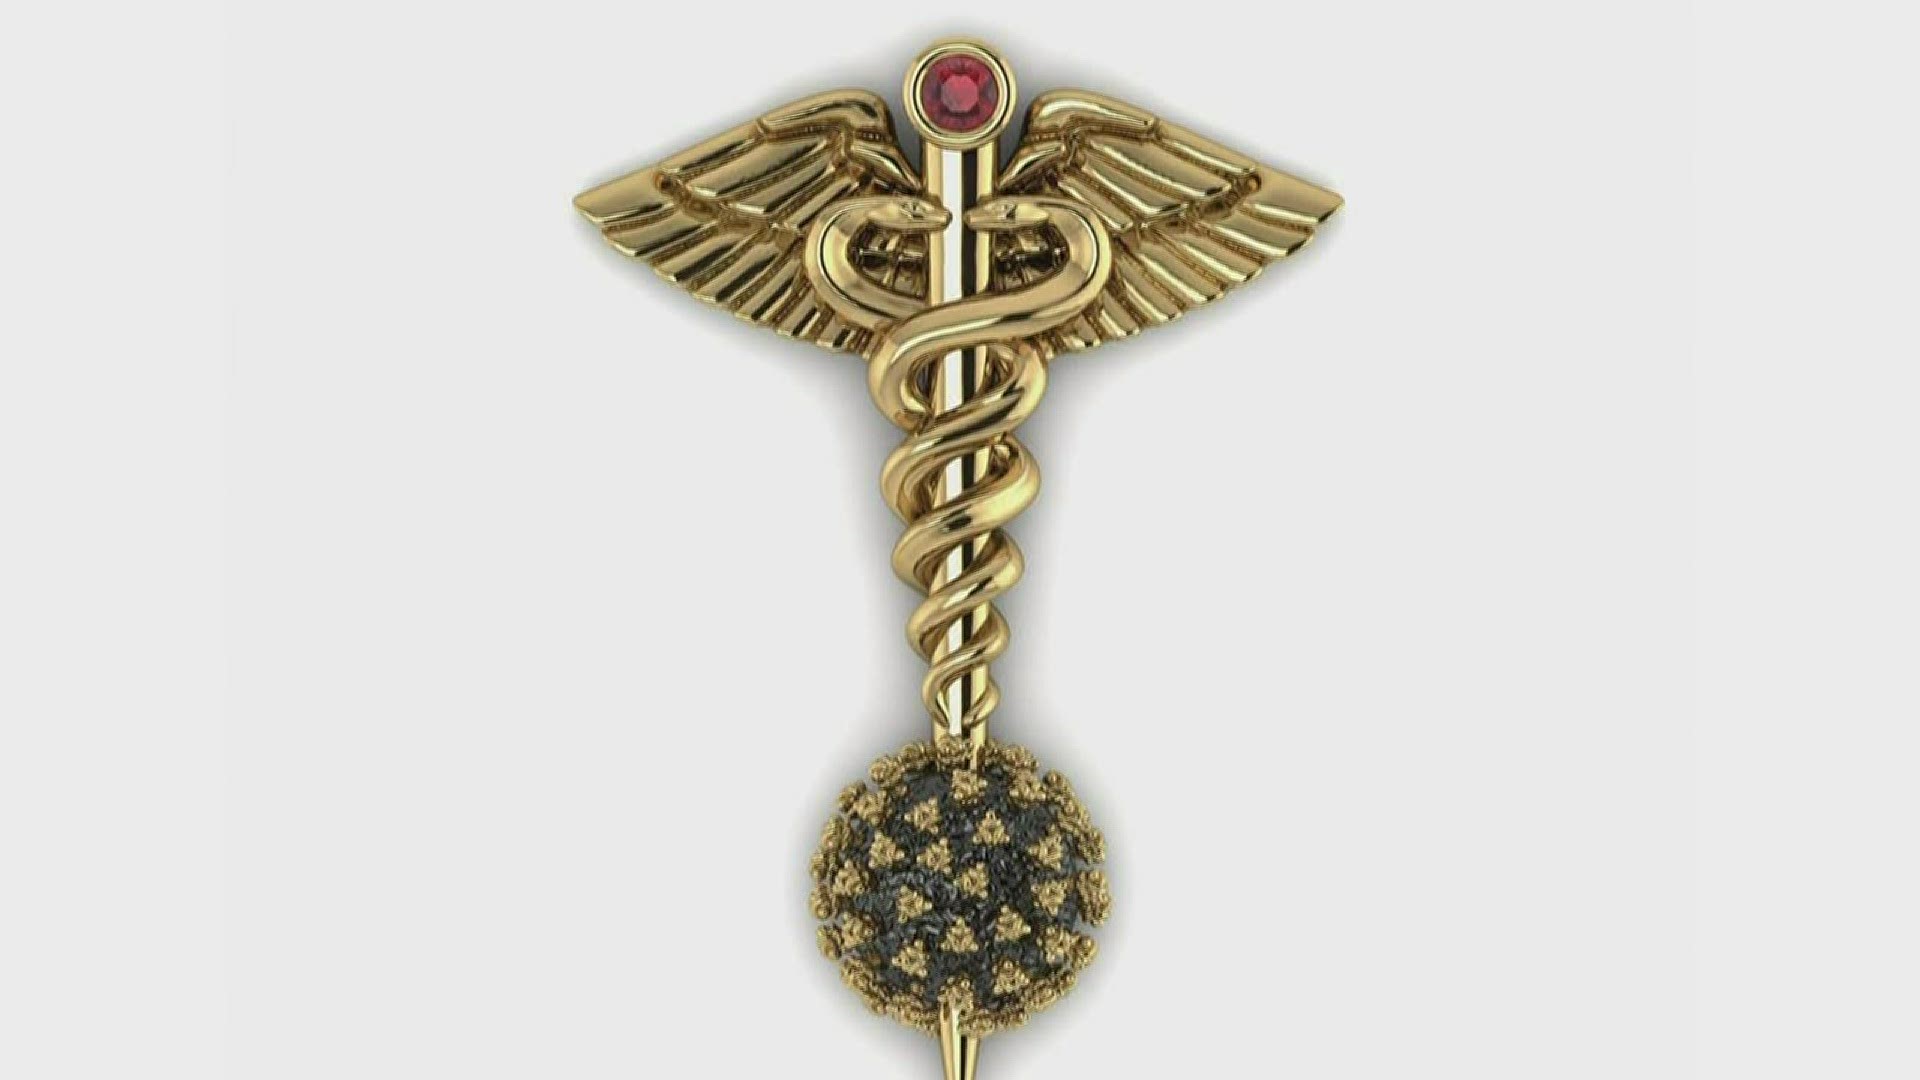 A local jeweler plans to donate 1,000 custom-made pins to symbolize the medical workers battle against the coronavirus.